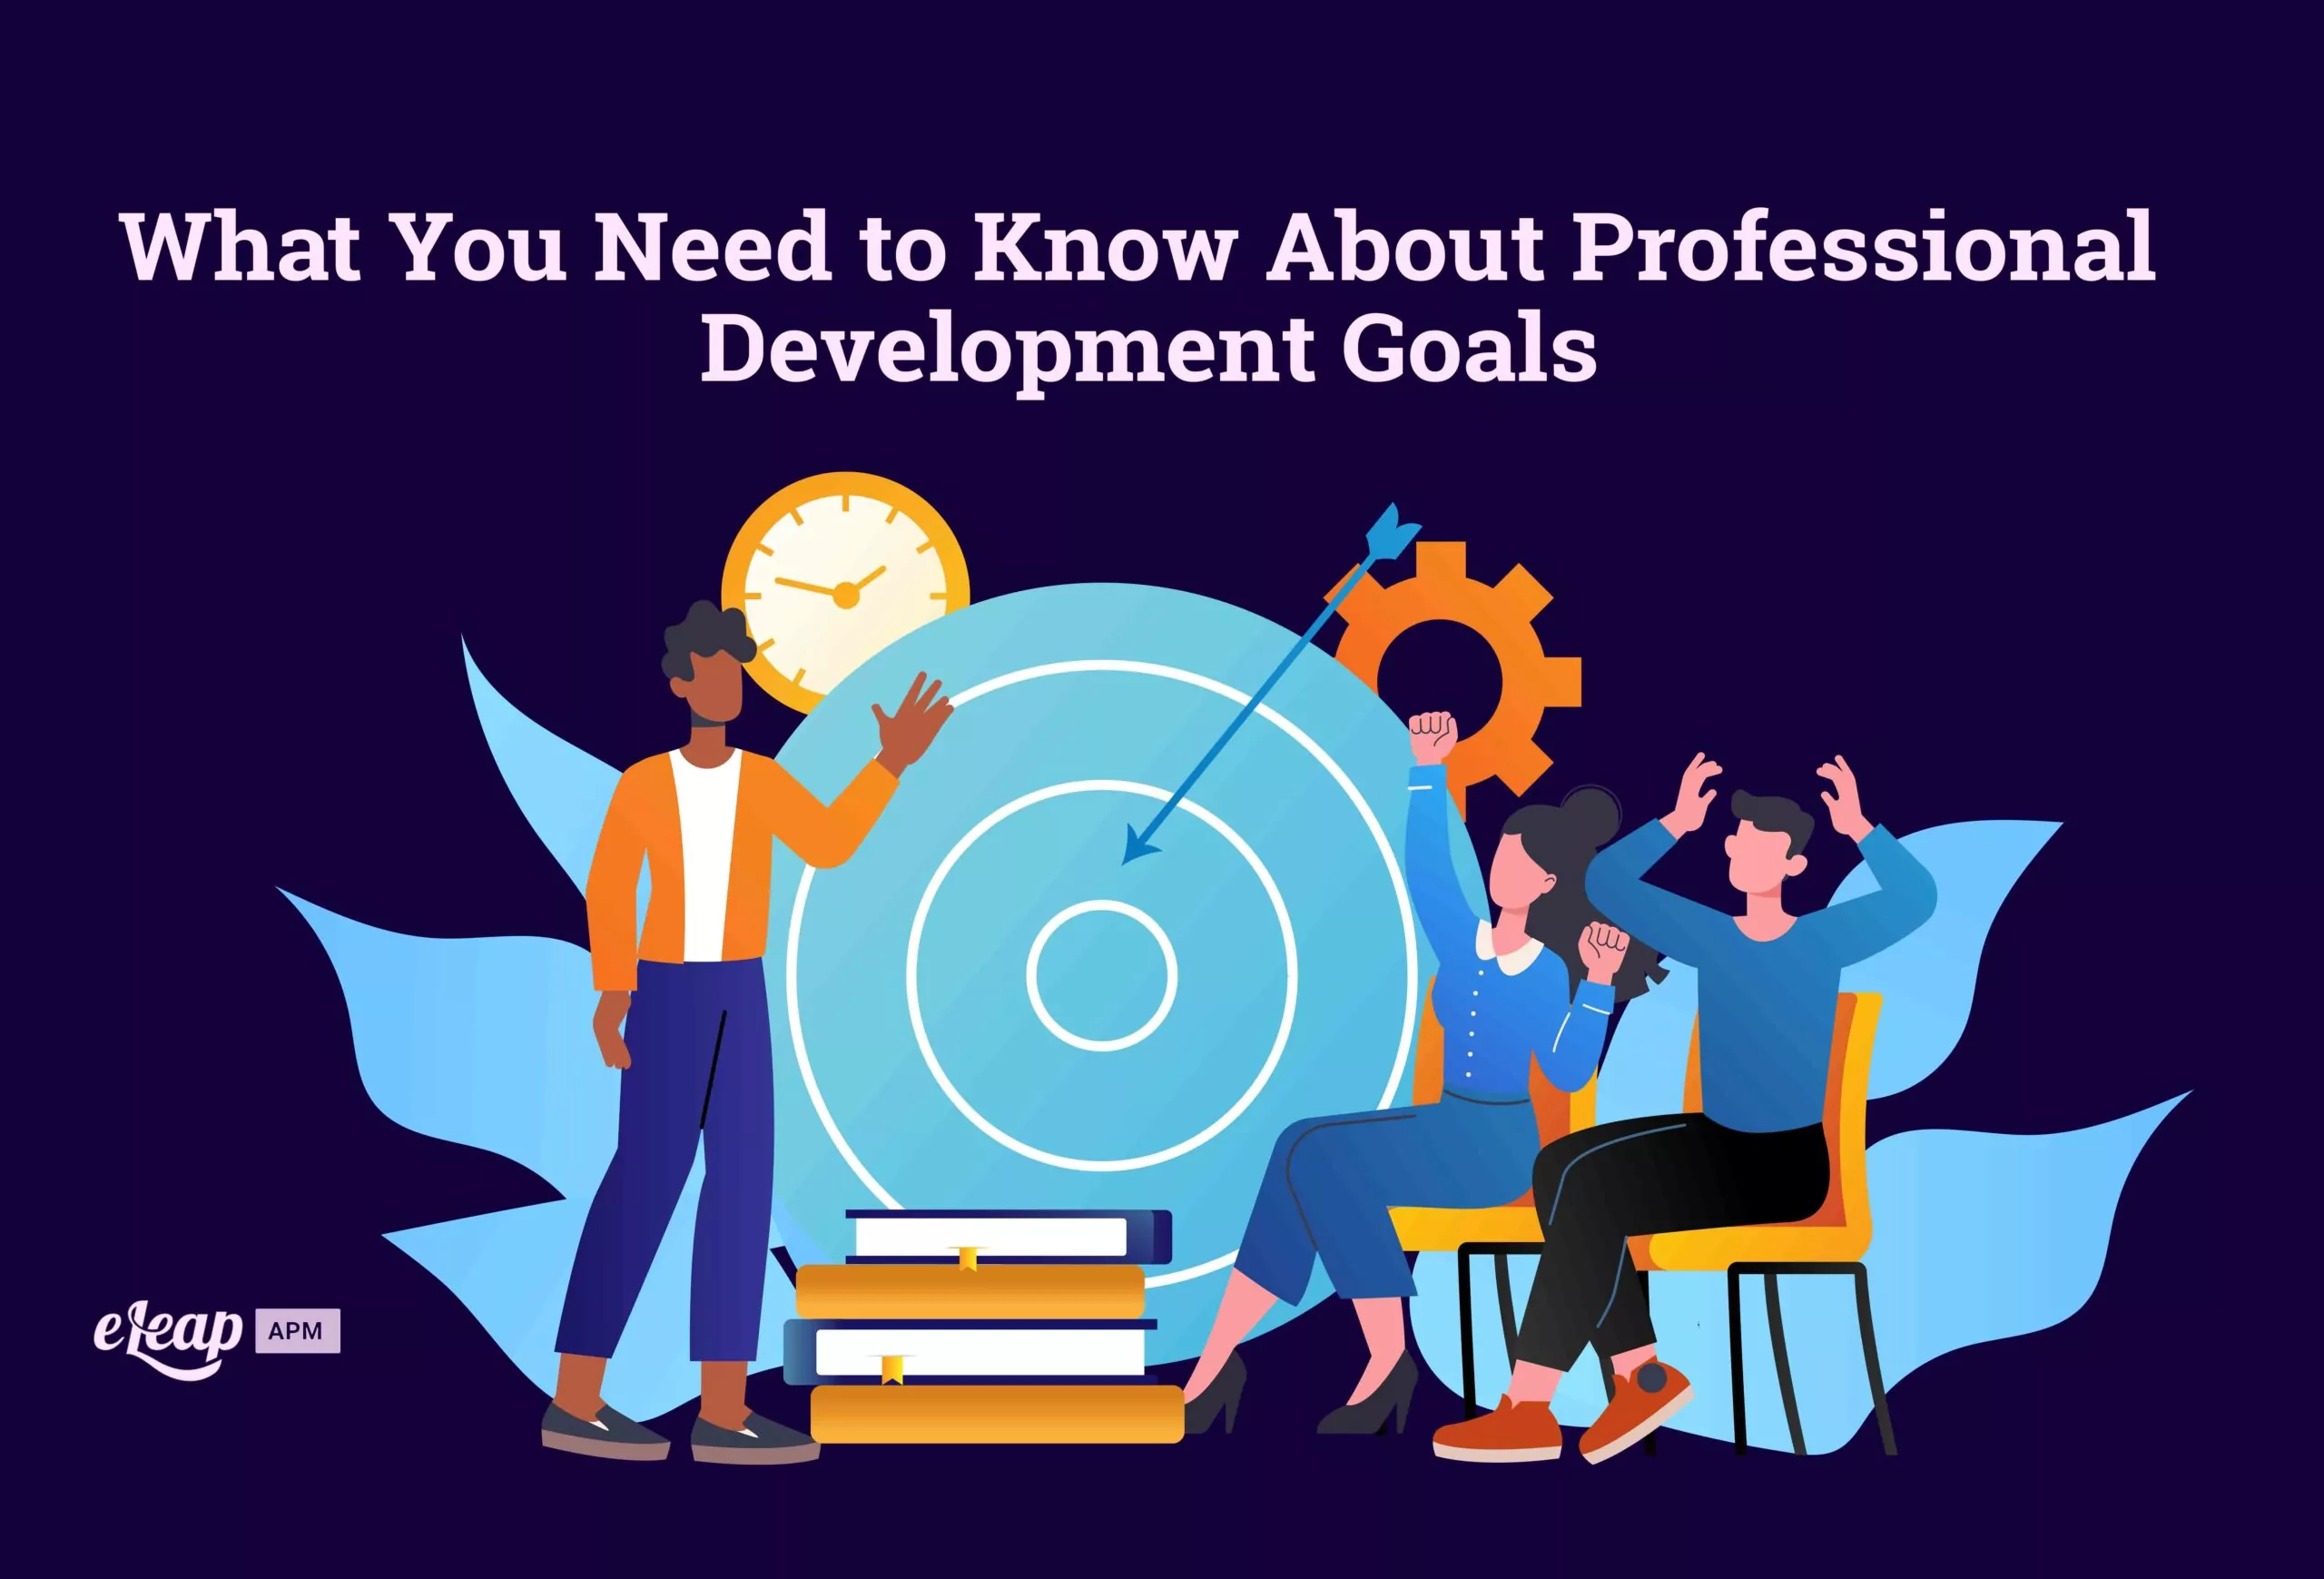 What You Need to Know About Professional Development Goals